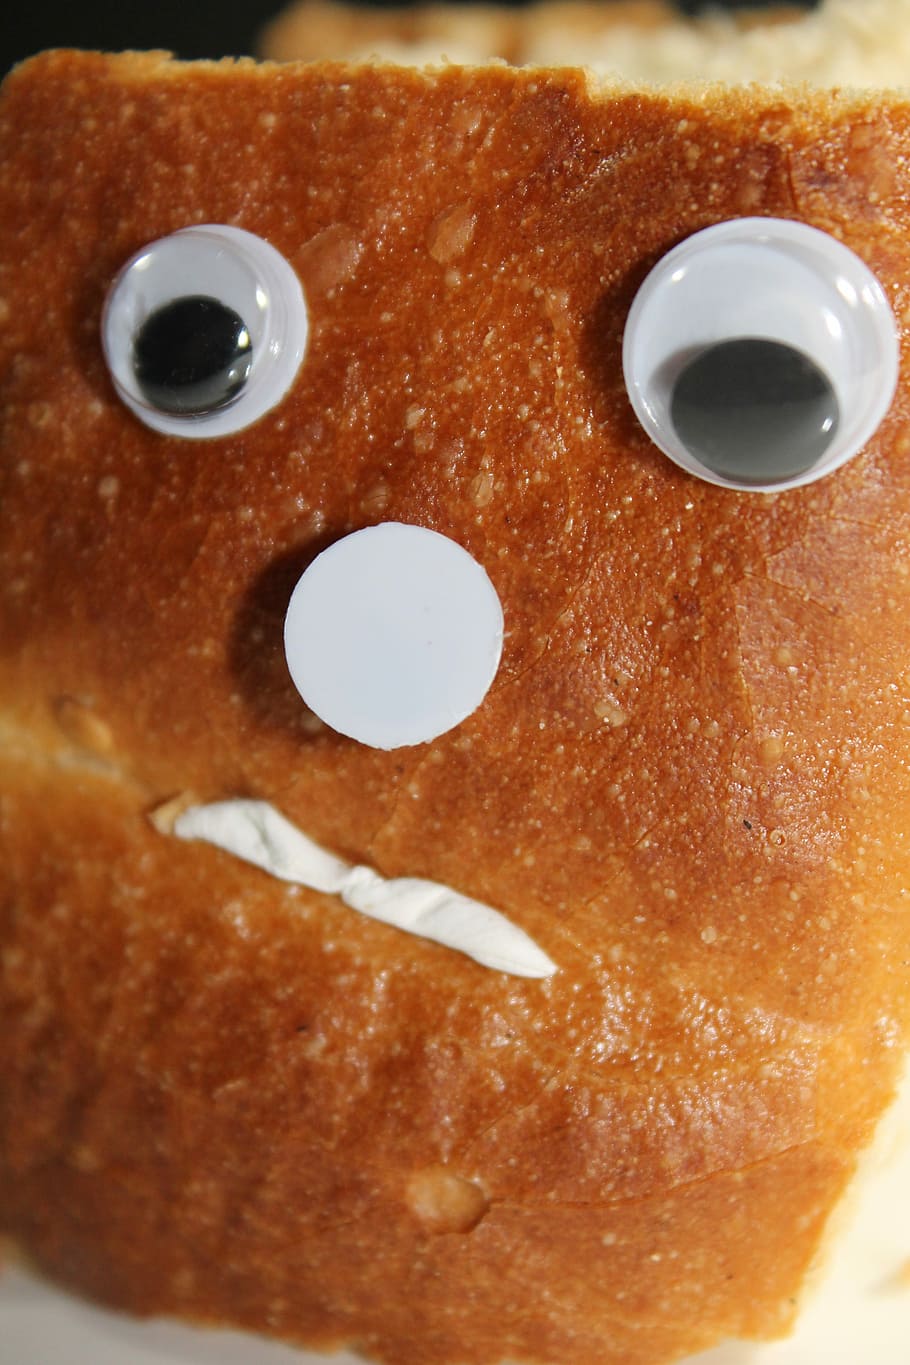 Bread, Face, Grumpy, Snub Nose, Sour, figure, eyes, nose, mouth, nature